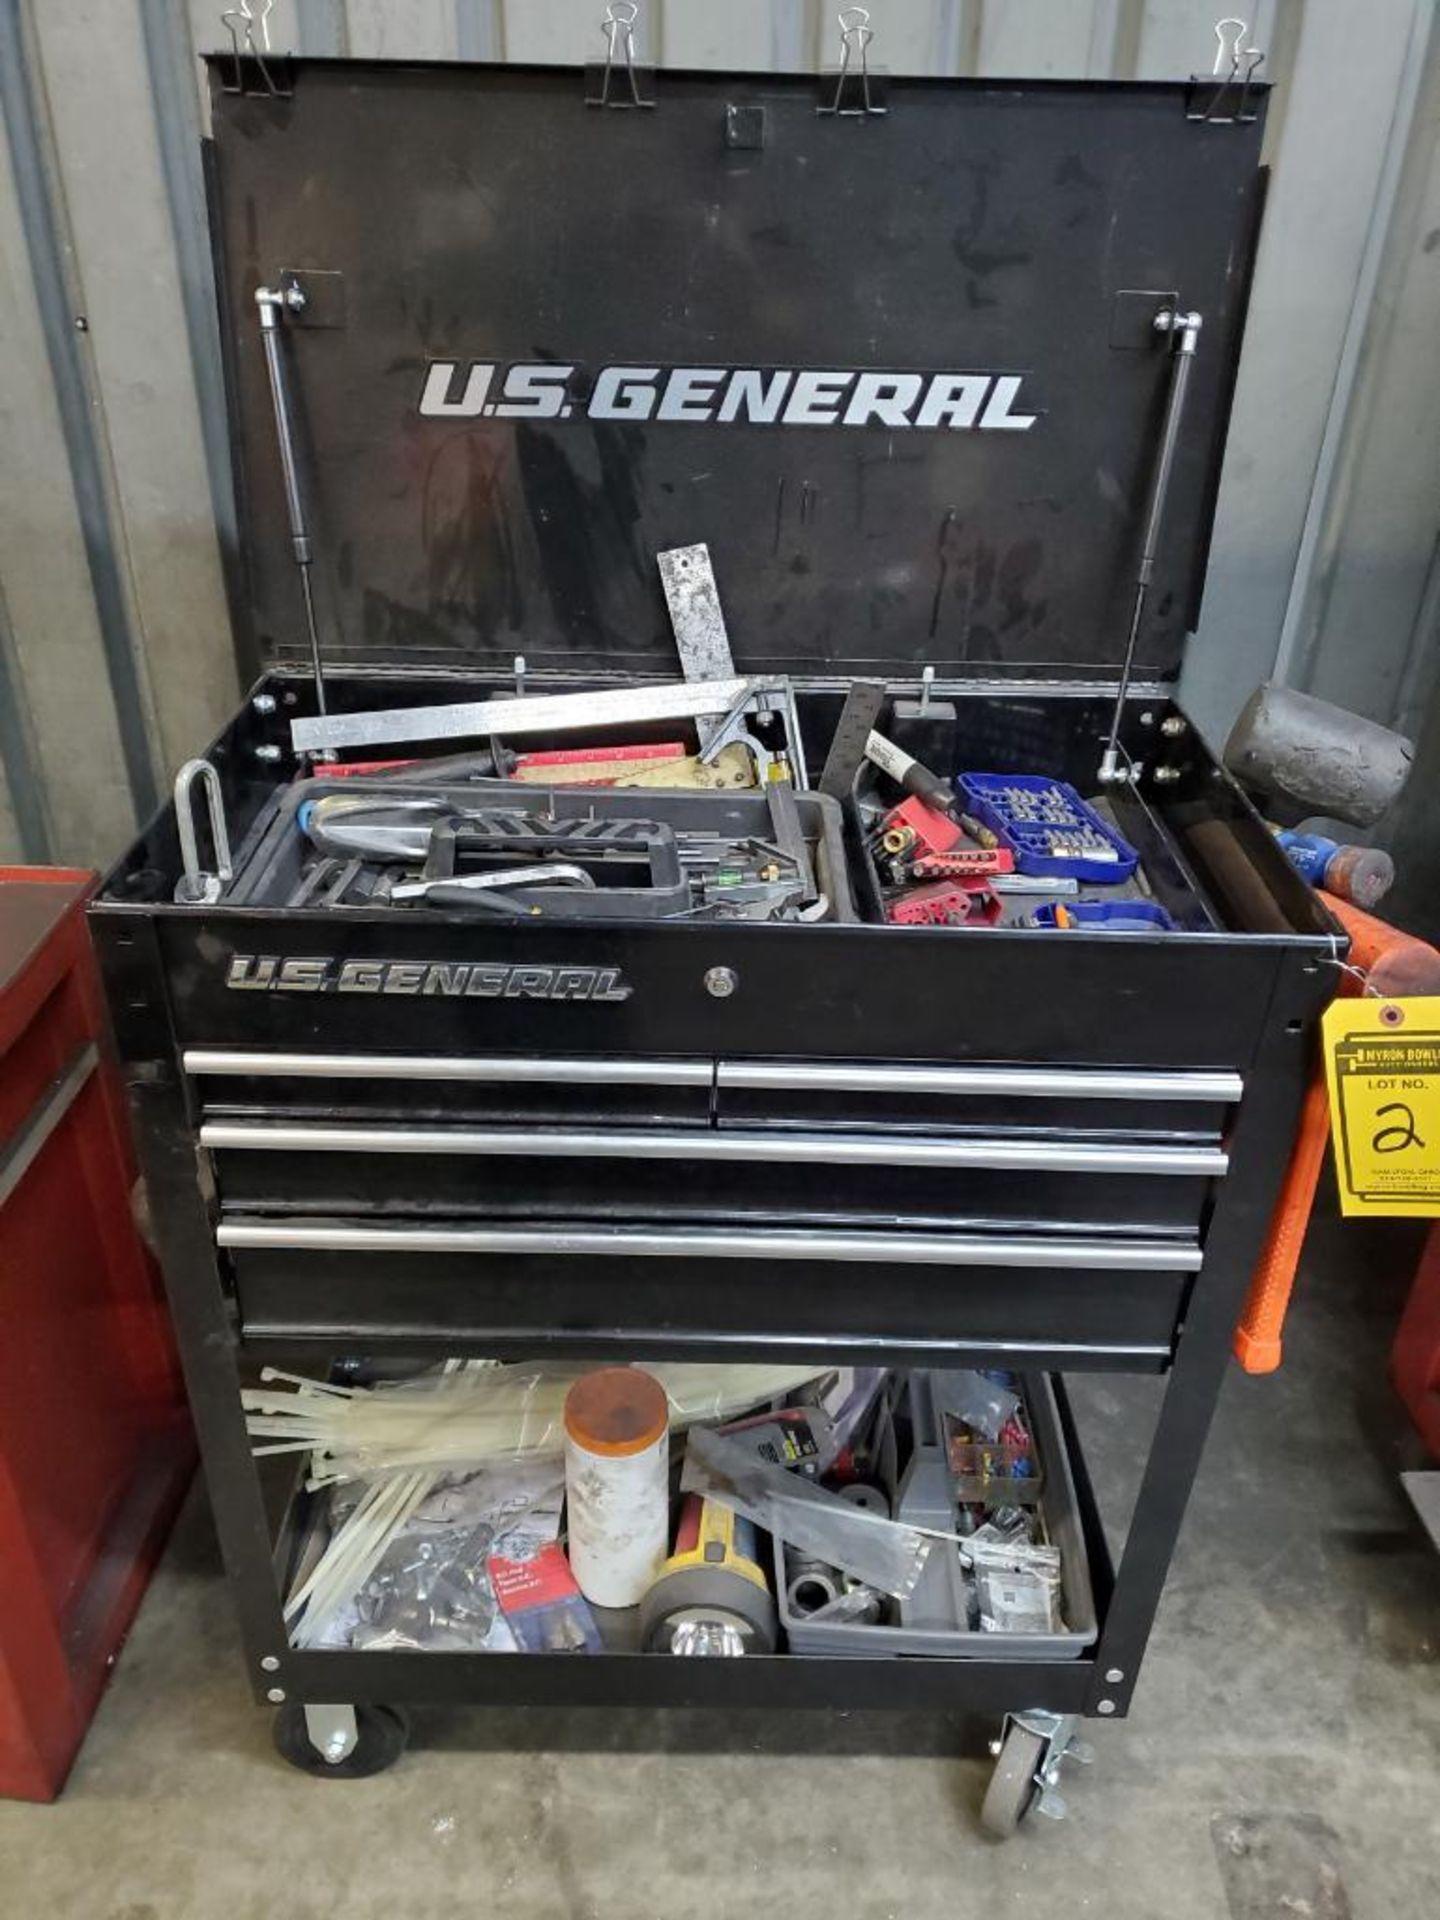 US GENERAL 4-DRAWER ROLLING TOOL CHEST, TOP OPEN COMPARTMENT W/ CONTENTS: WRENCHES, ALLEN WRENCHES,